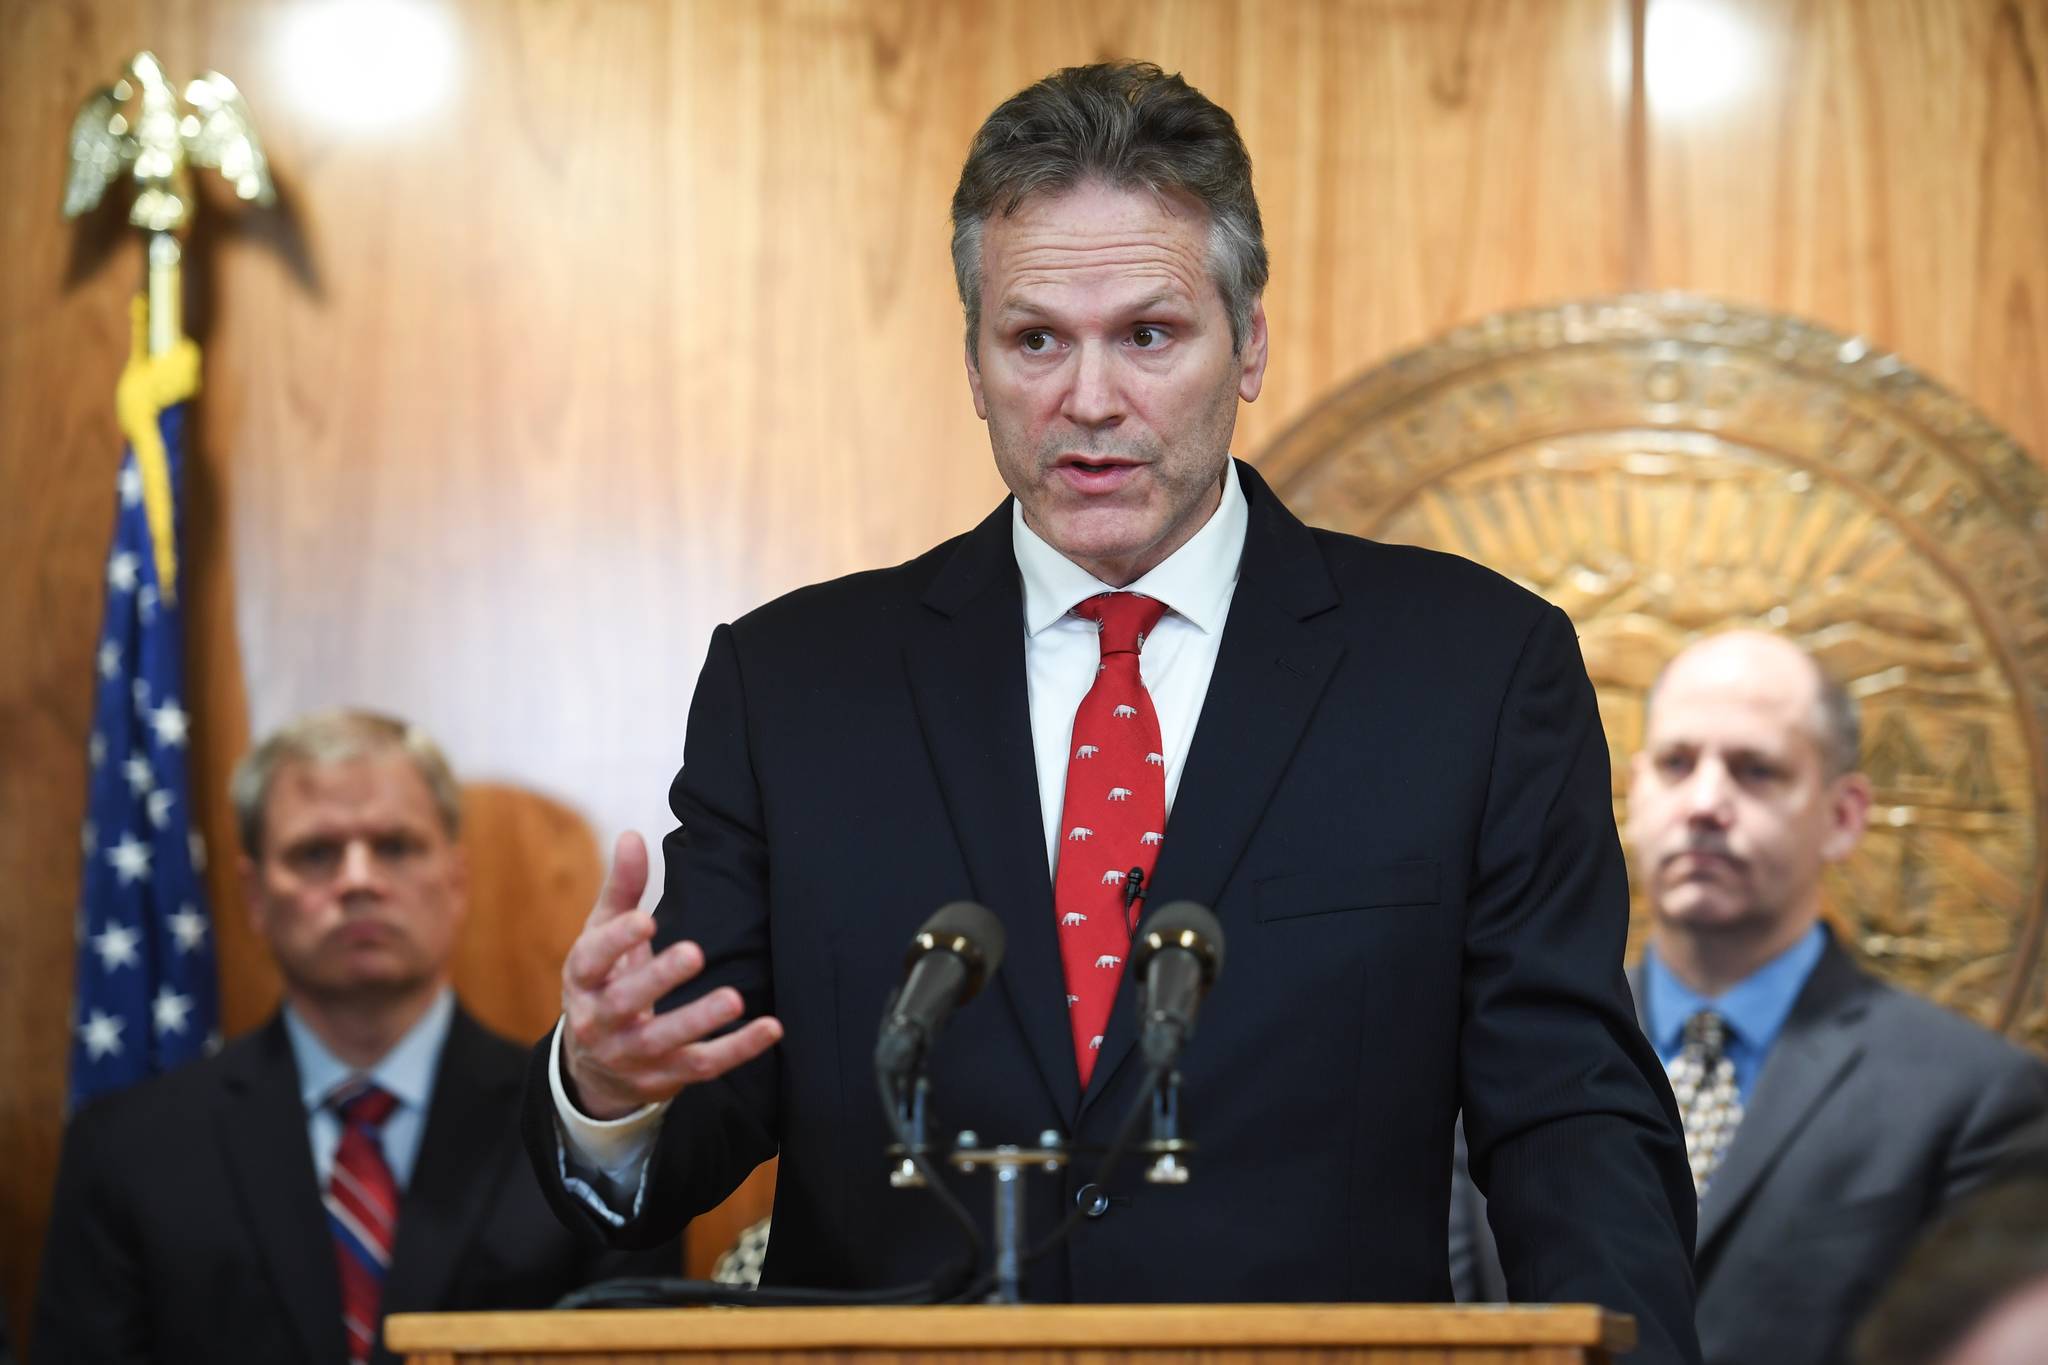 Gov. Mike Dunleavy announces his state budget during a press conference at the Capitol on Wednesday, Dec. 11, 2019. (Michael Penn | Juneau Empire)